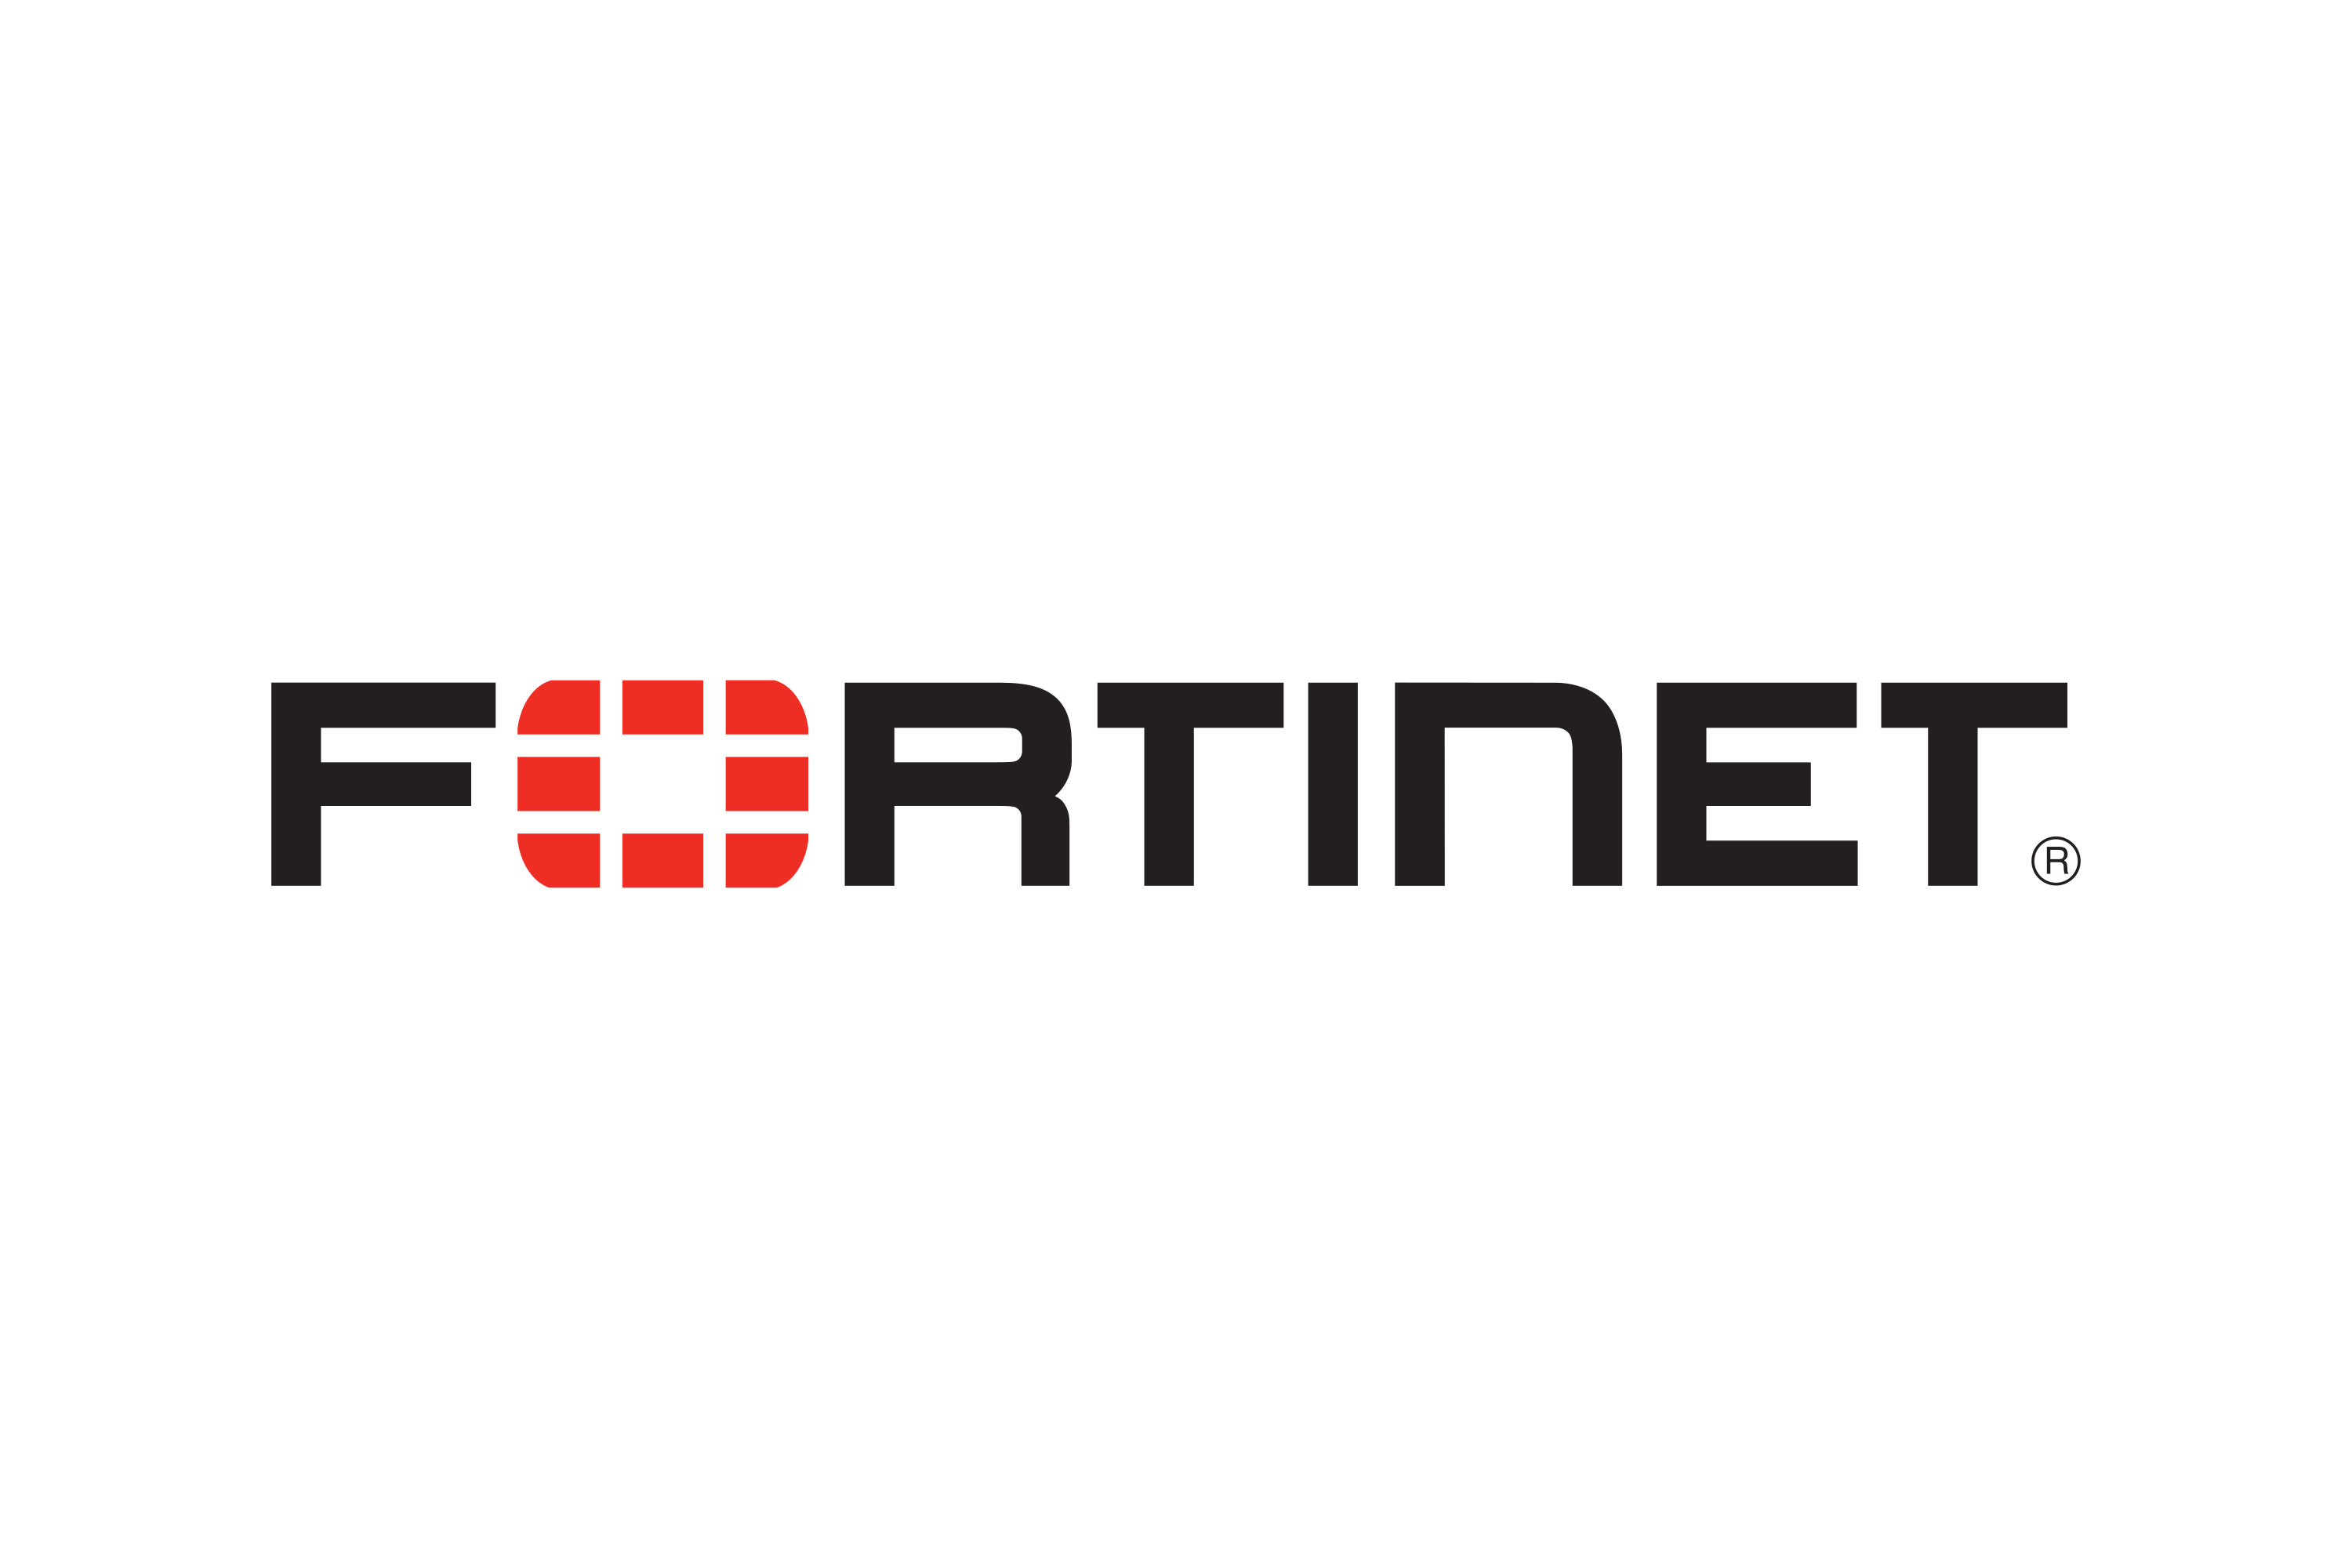 FORTINET.png